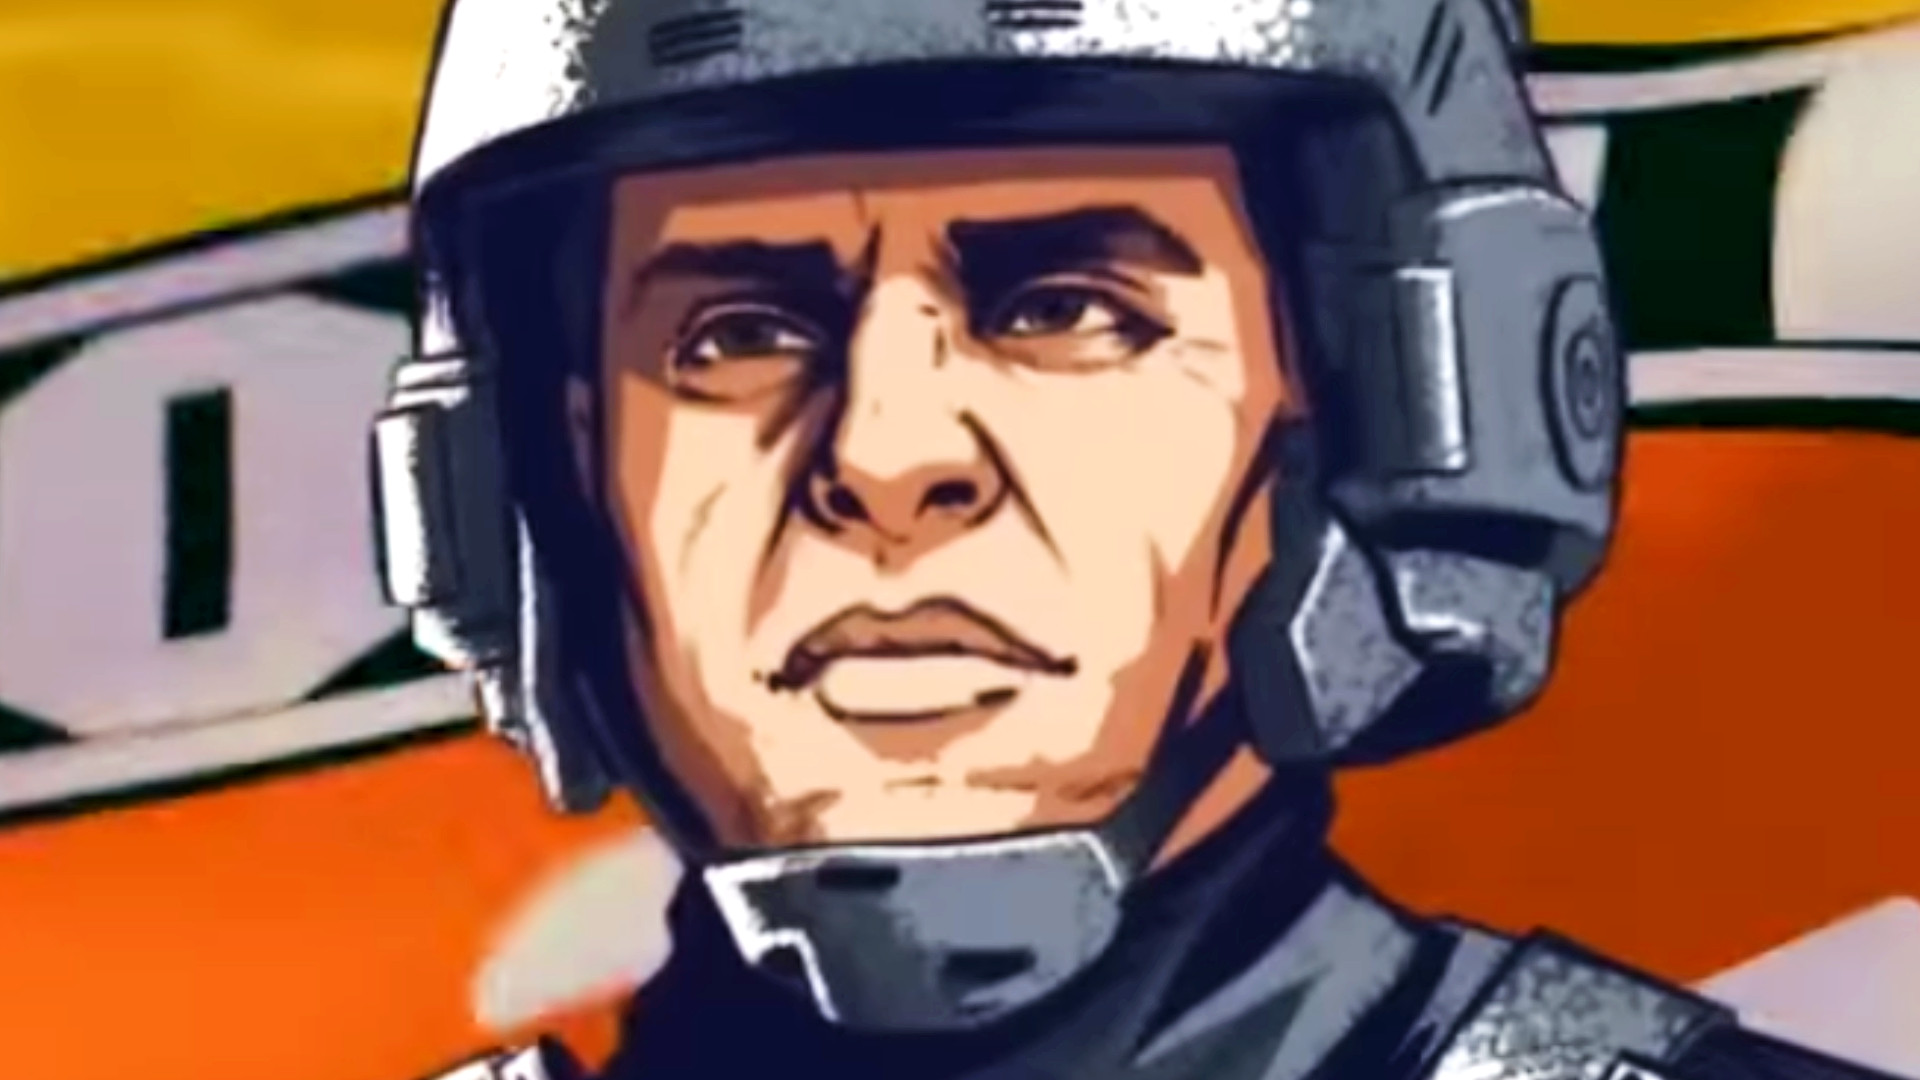 The Starship Troopers RTS is getting new DLC, and it's cheap right now